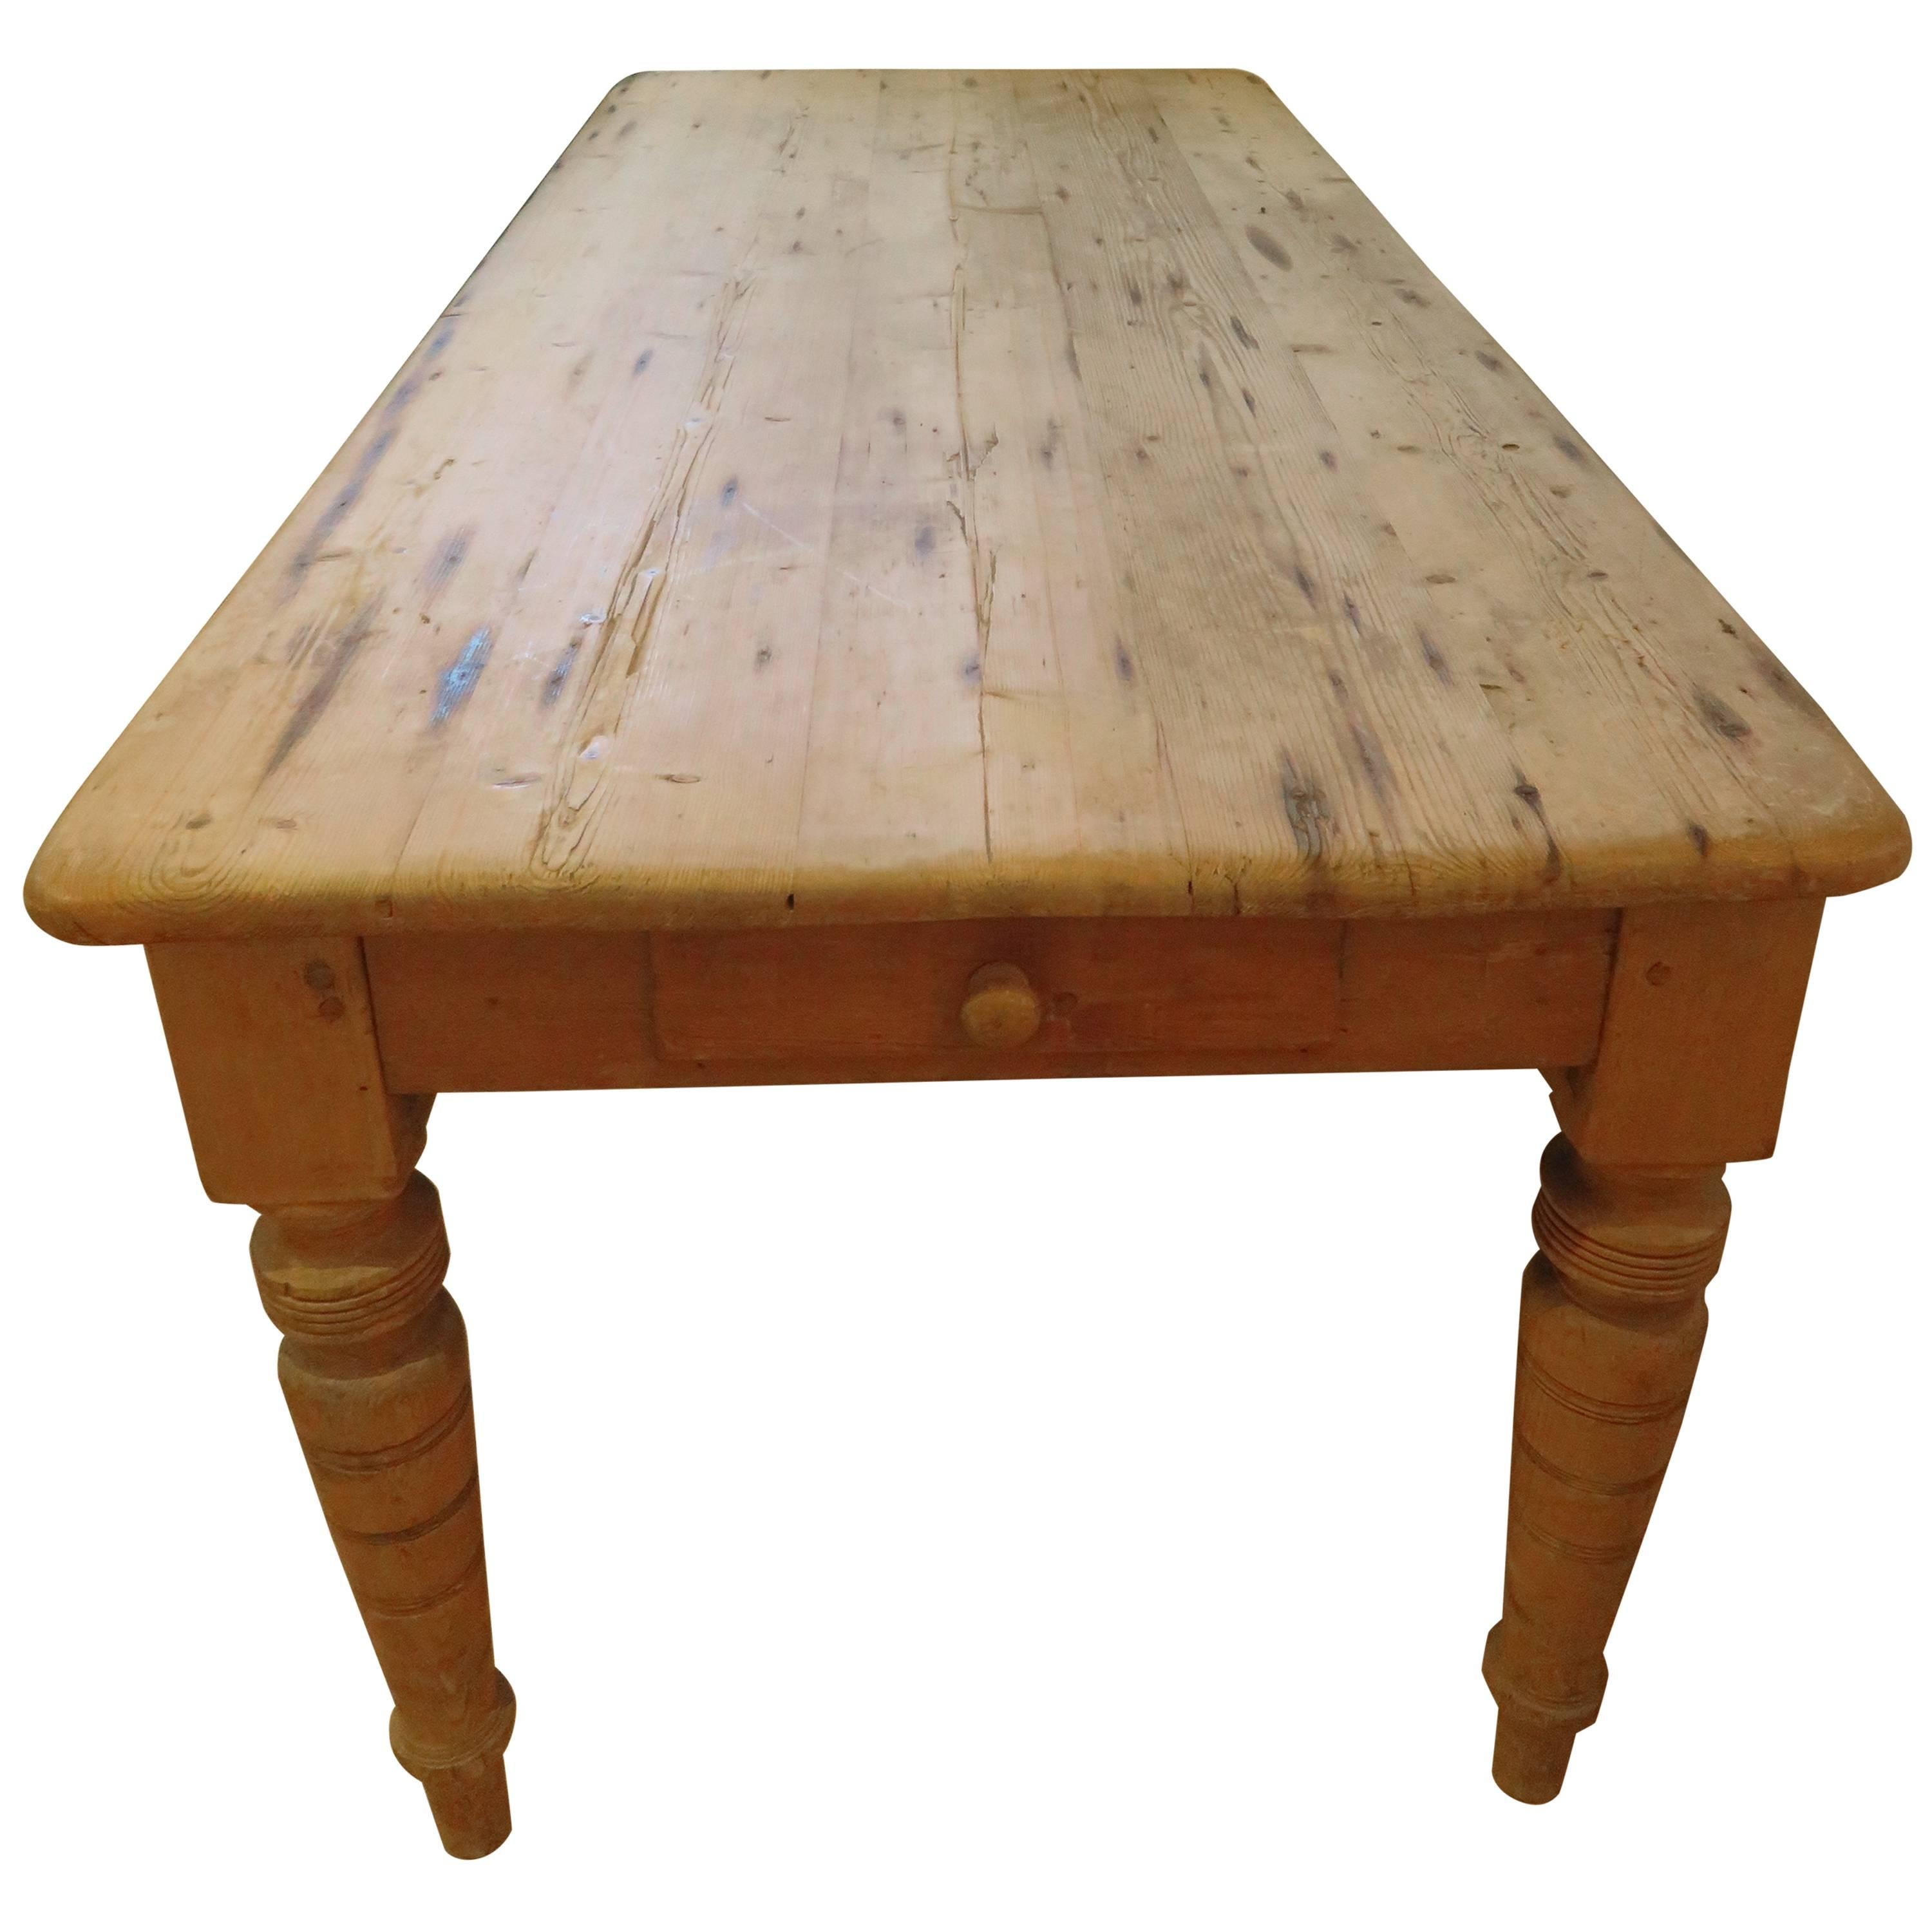 Large New England Antique Country Pine Dining Table or Desk